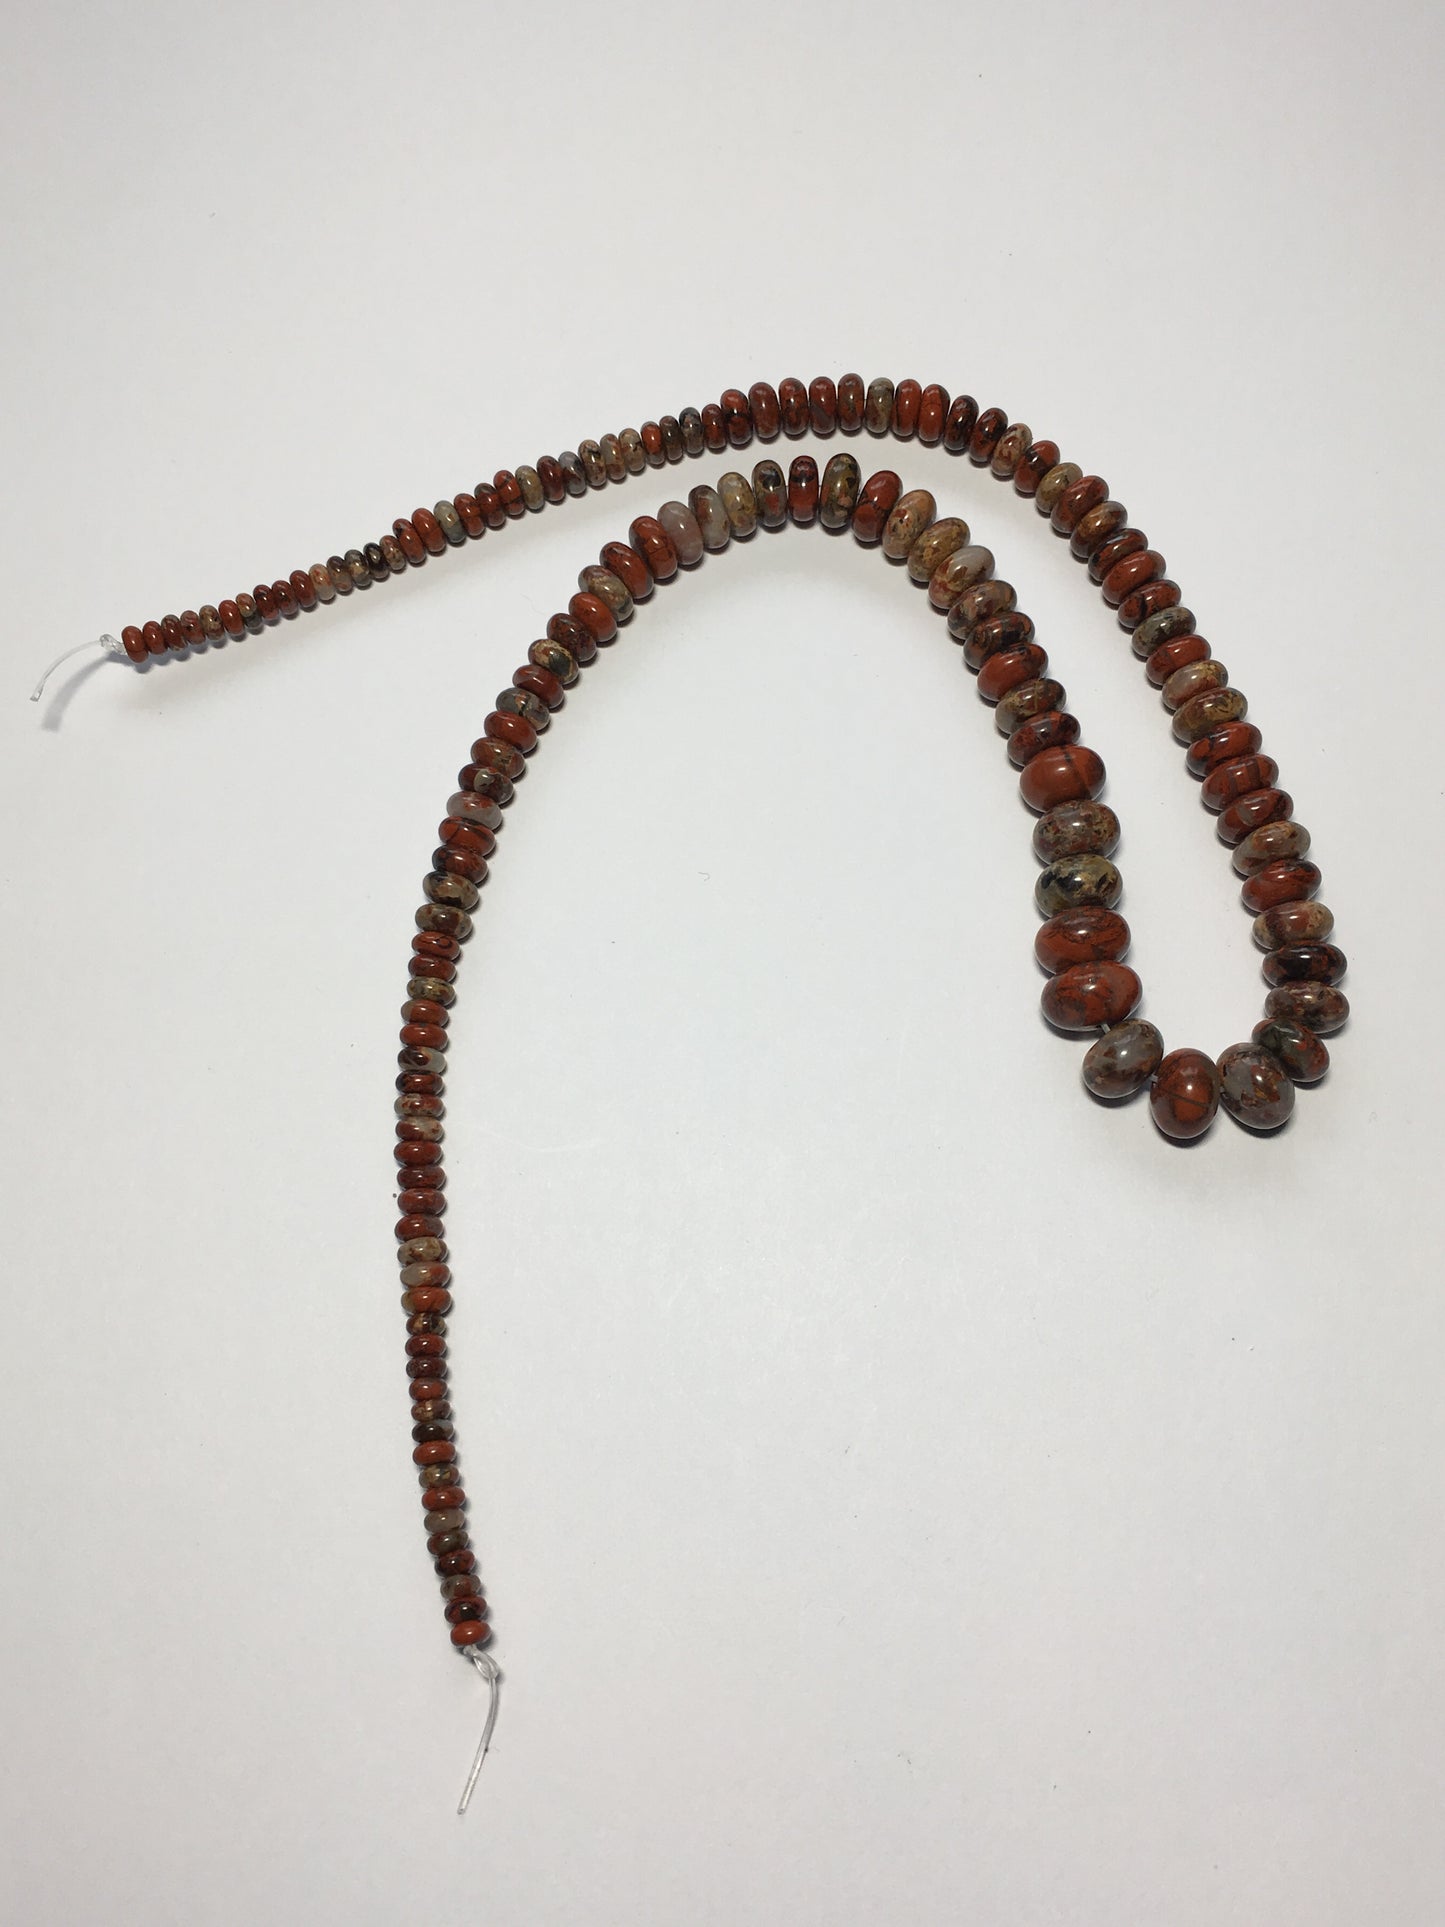 Red Silver Leaf Jasper Semi-Precious 3-10 mm Rondelles, Ready to Make Necklace Beads, 16-Inch Strand